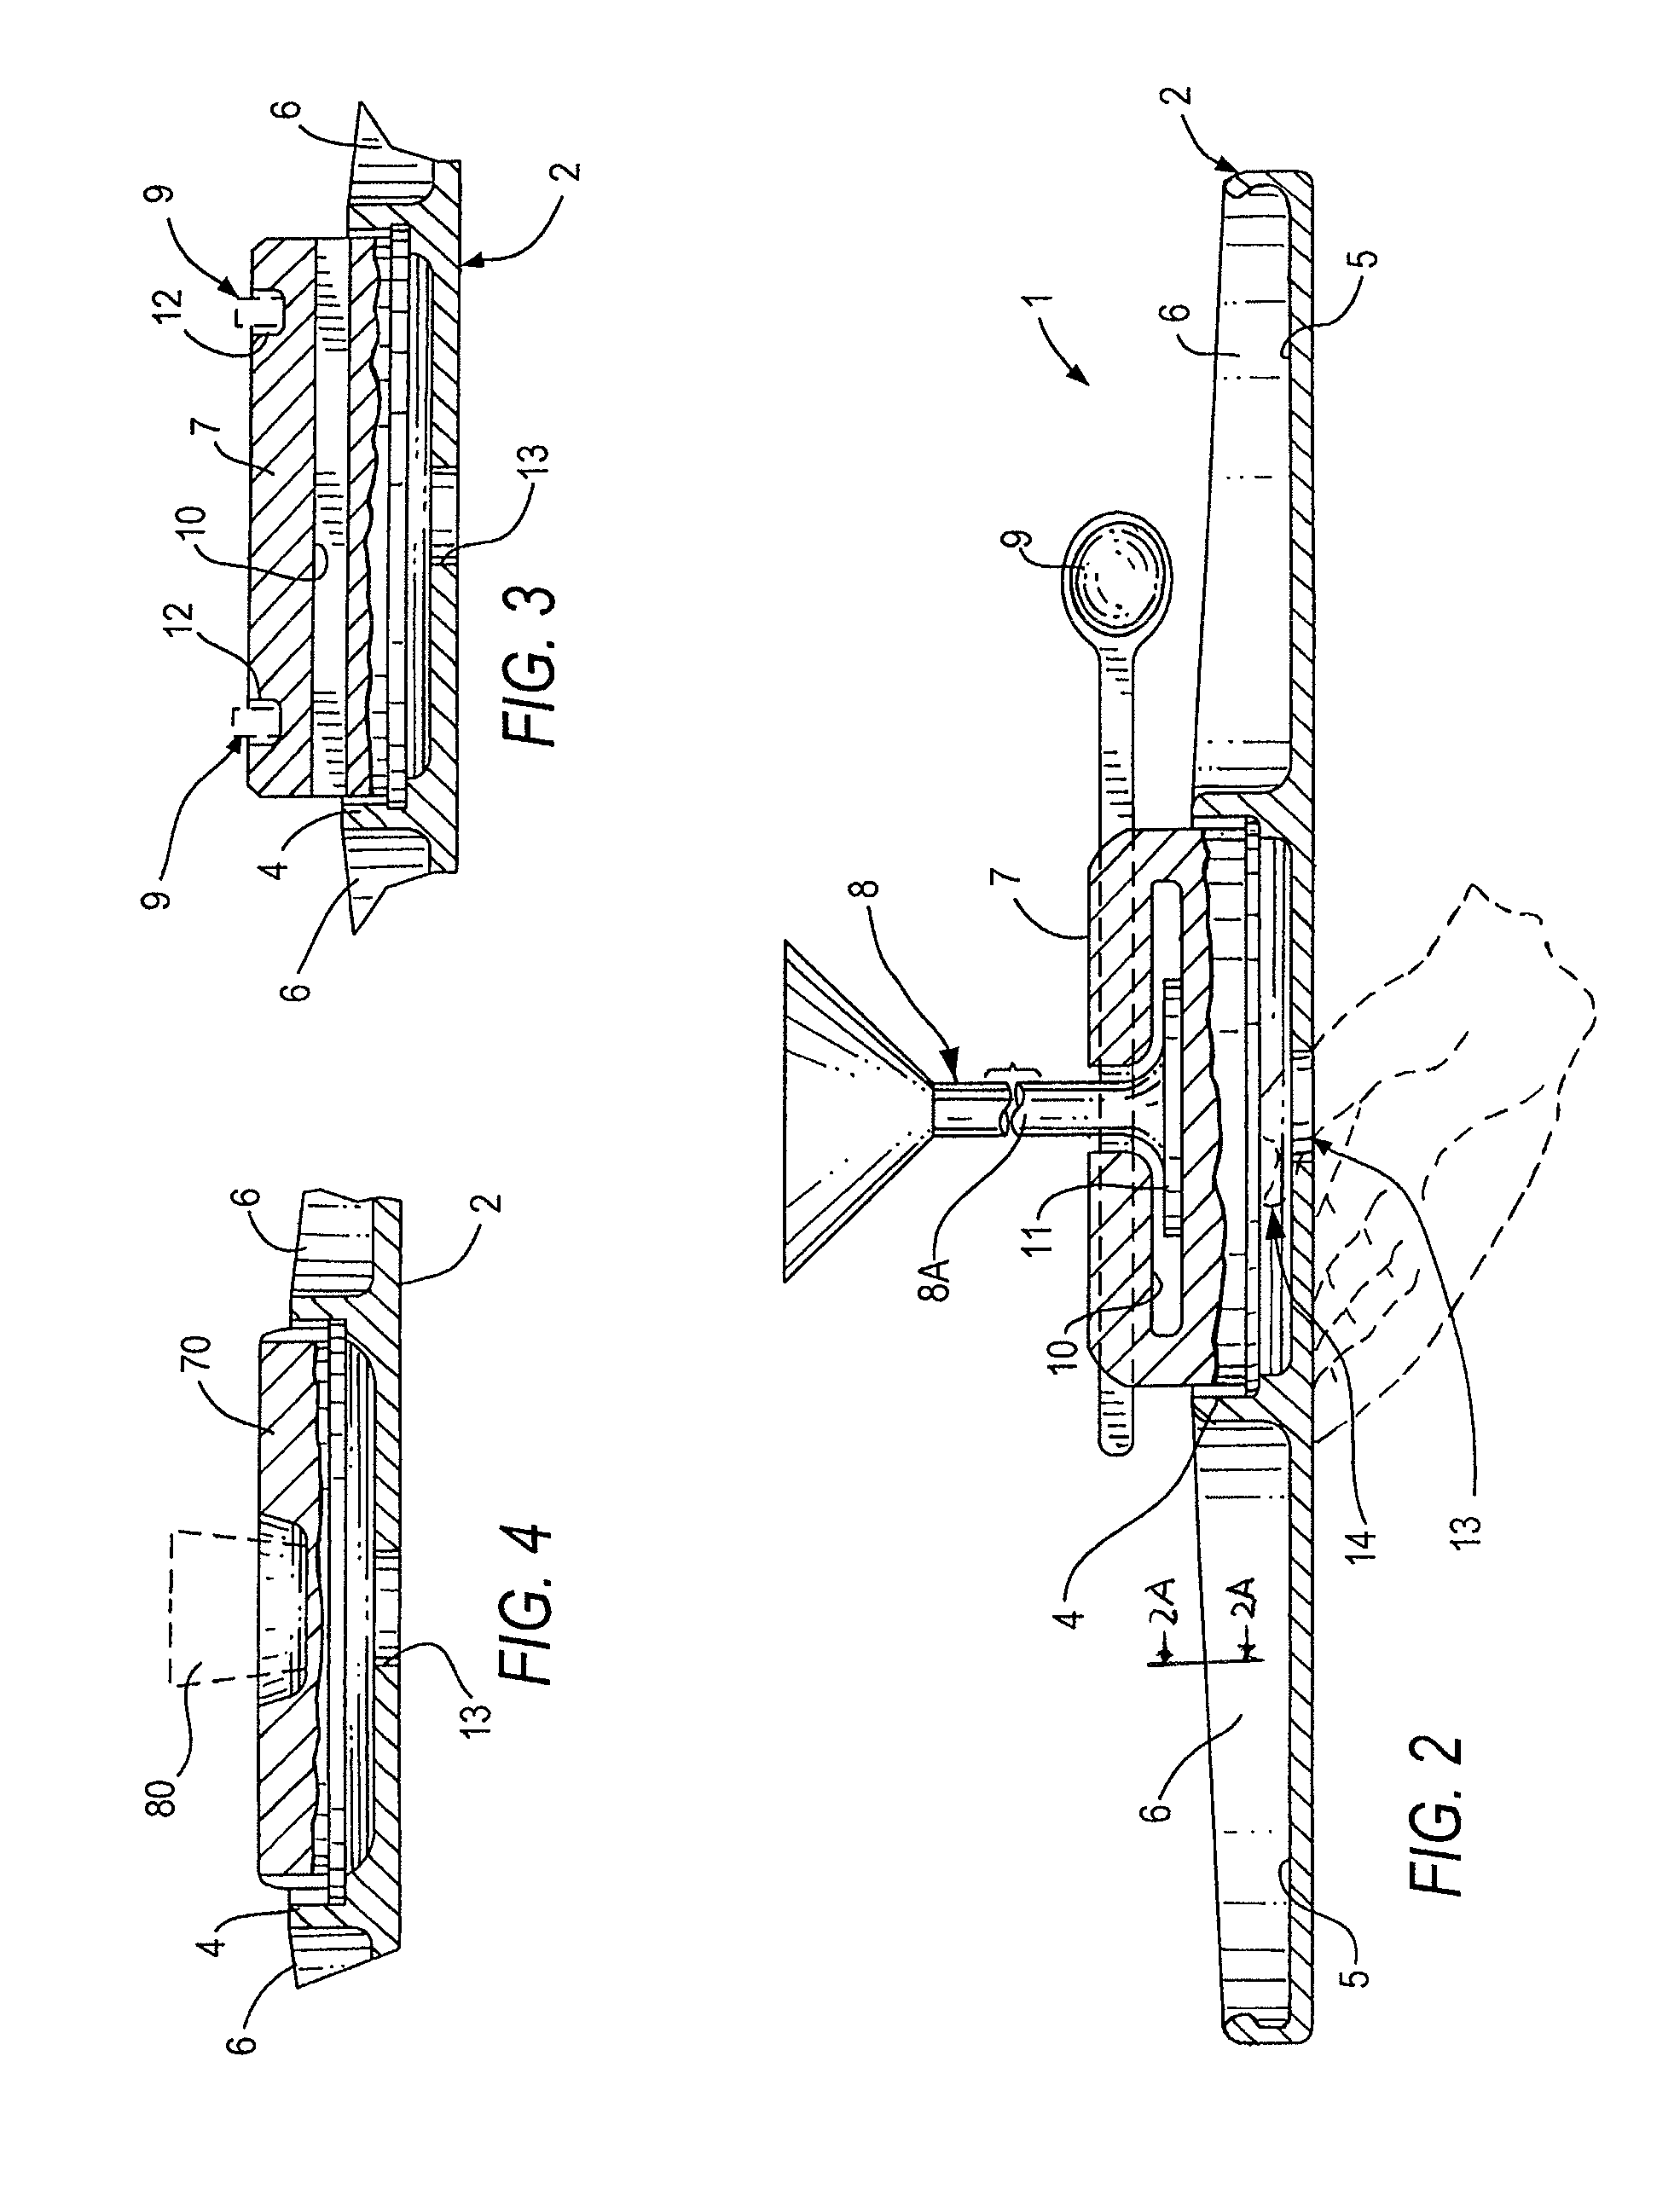 Aerodynamic device for use in organizing and holding food and liquid substances and eating utensils and for subsequent recreational use